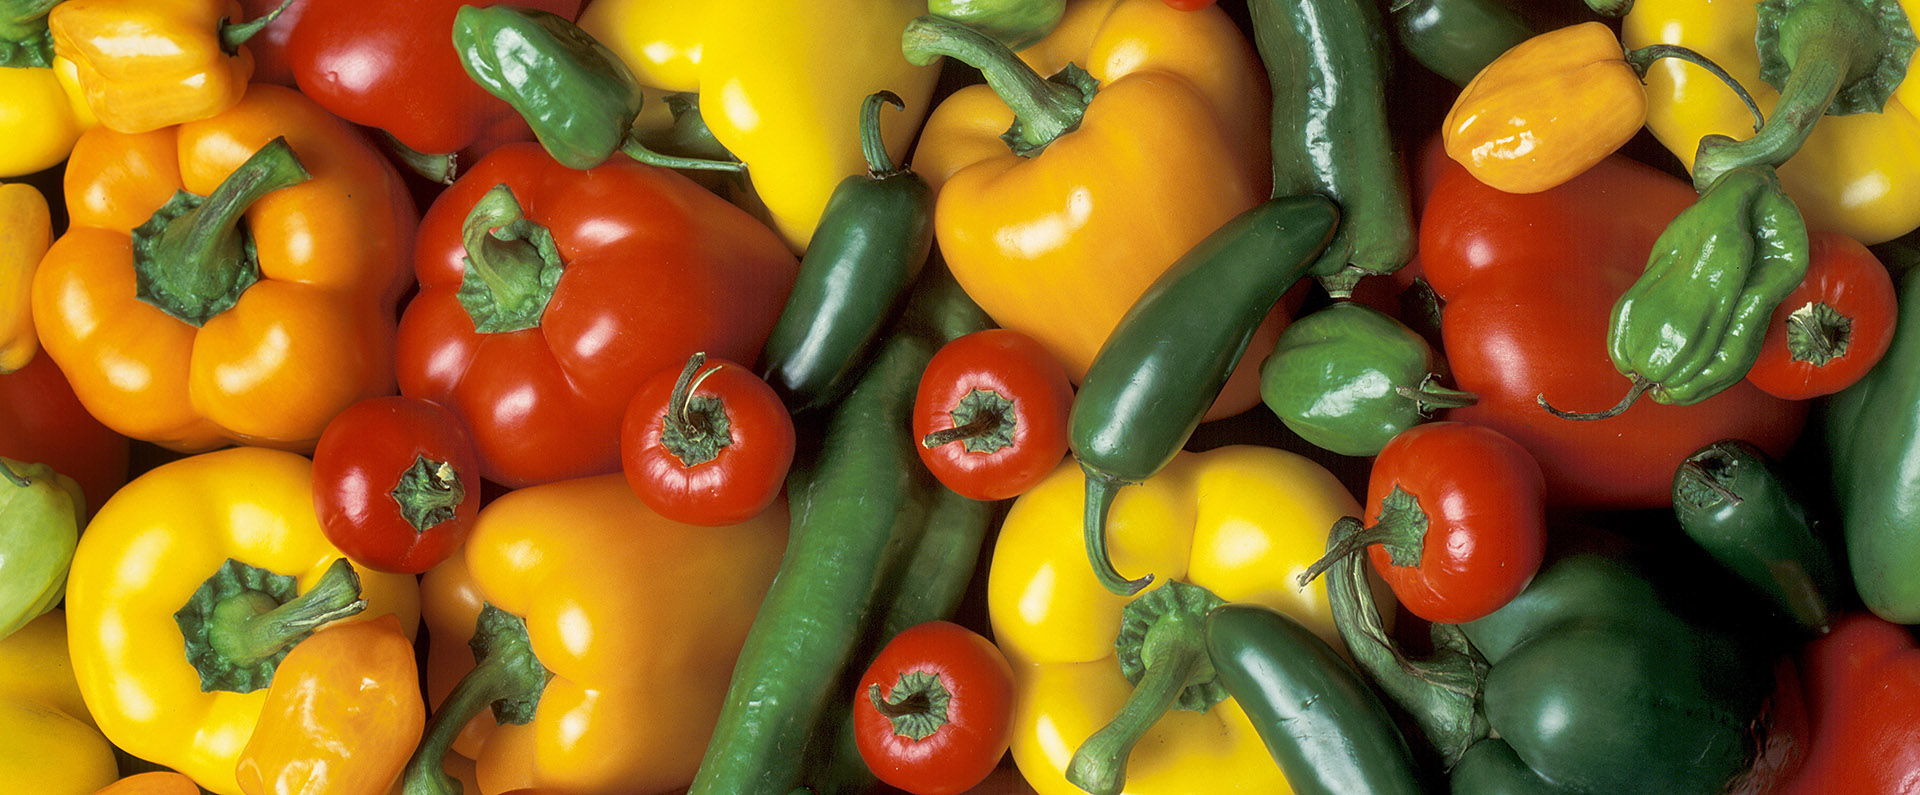 A variety of red, green and yellow peppers